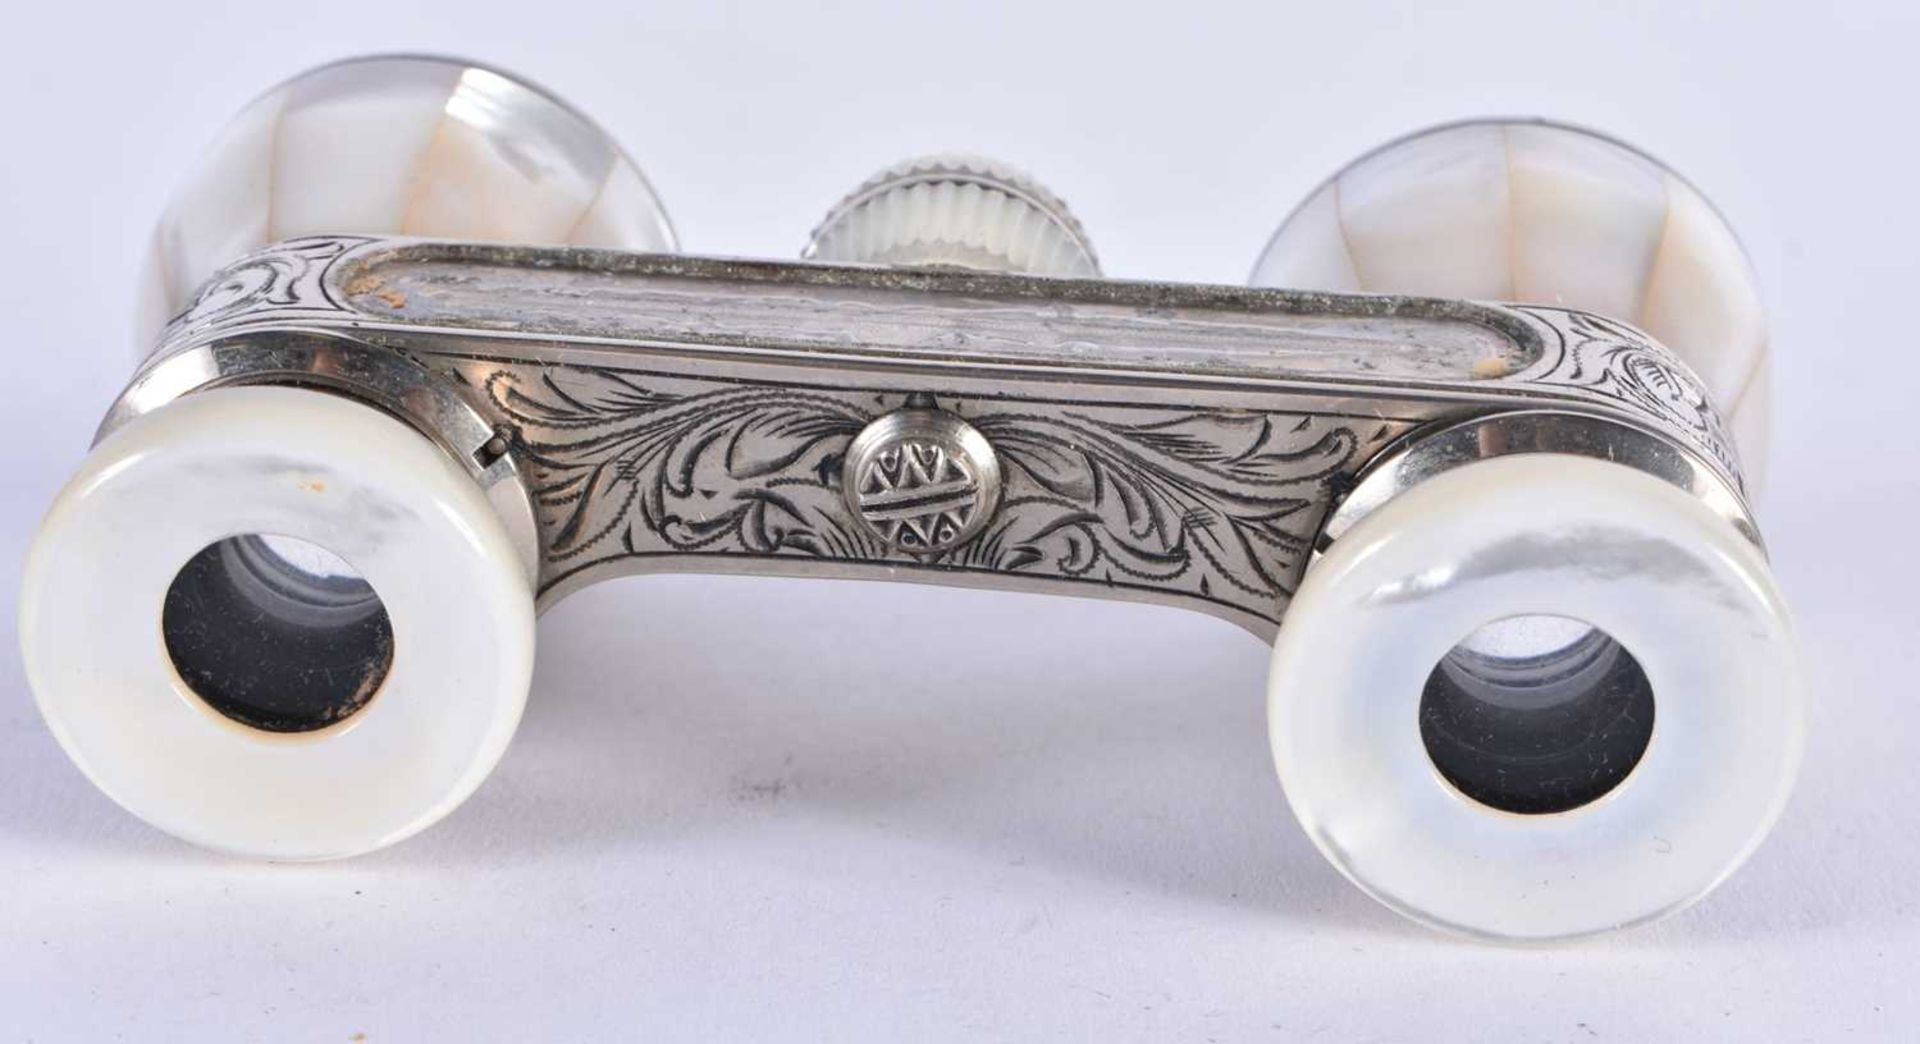 A PAIR OF MOTHER OF PEARL OPERA GLASSES. 7 cm x 6 cm extended. - Image 5 of 5